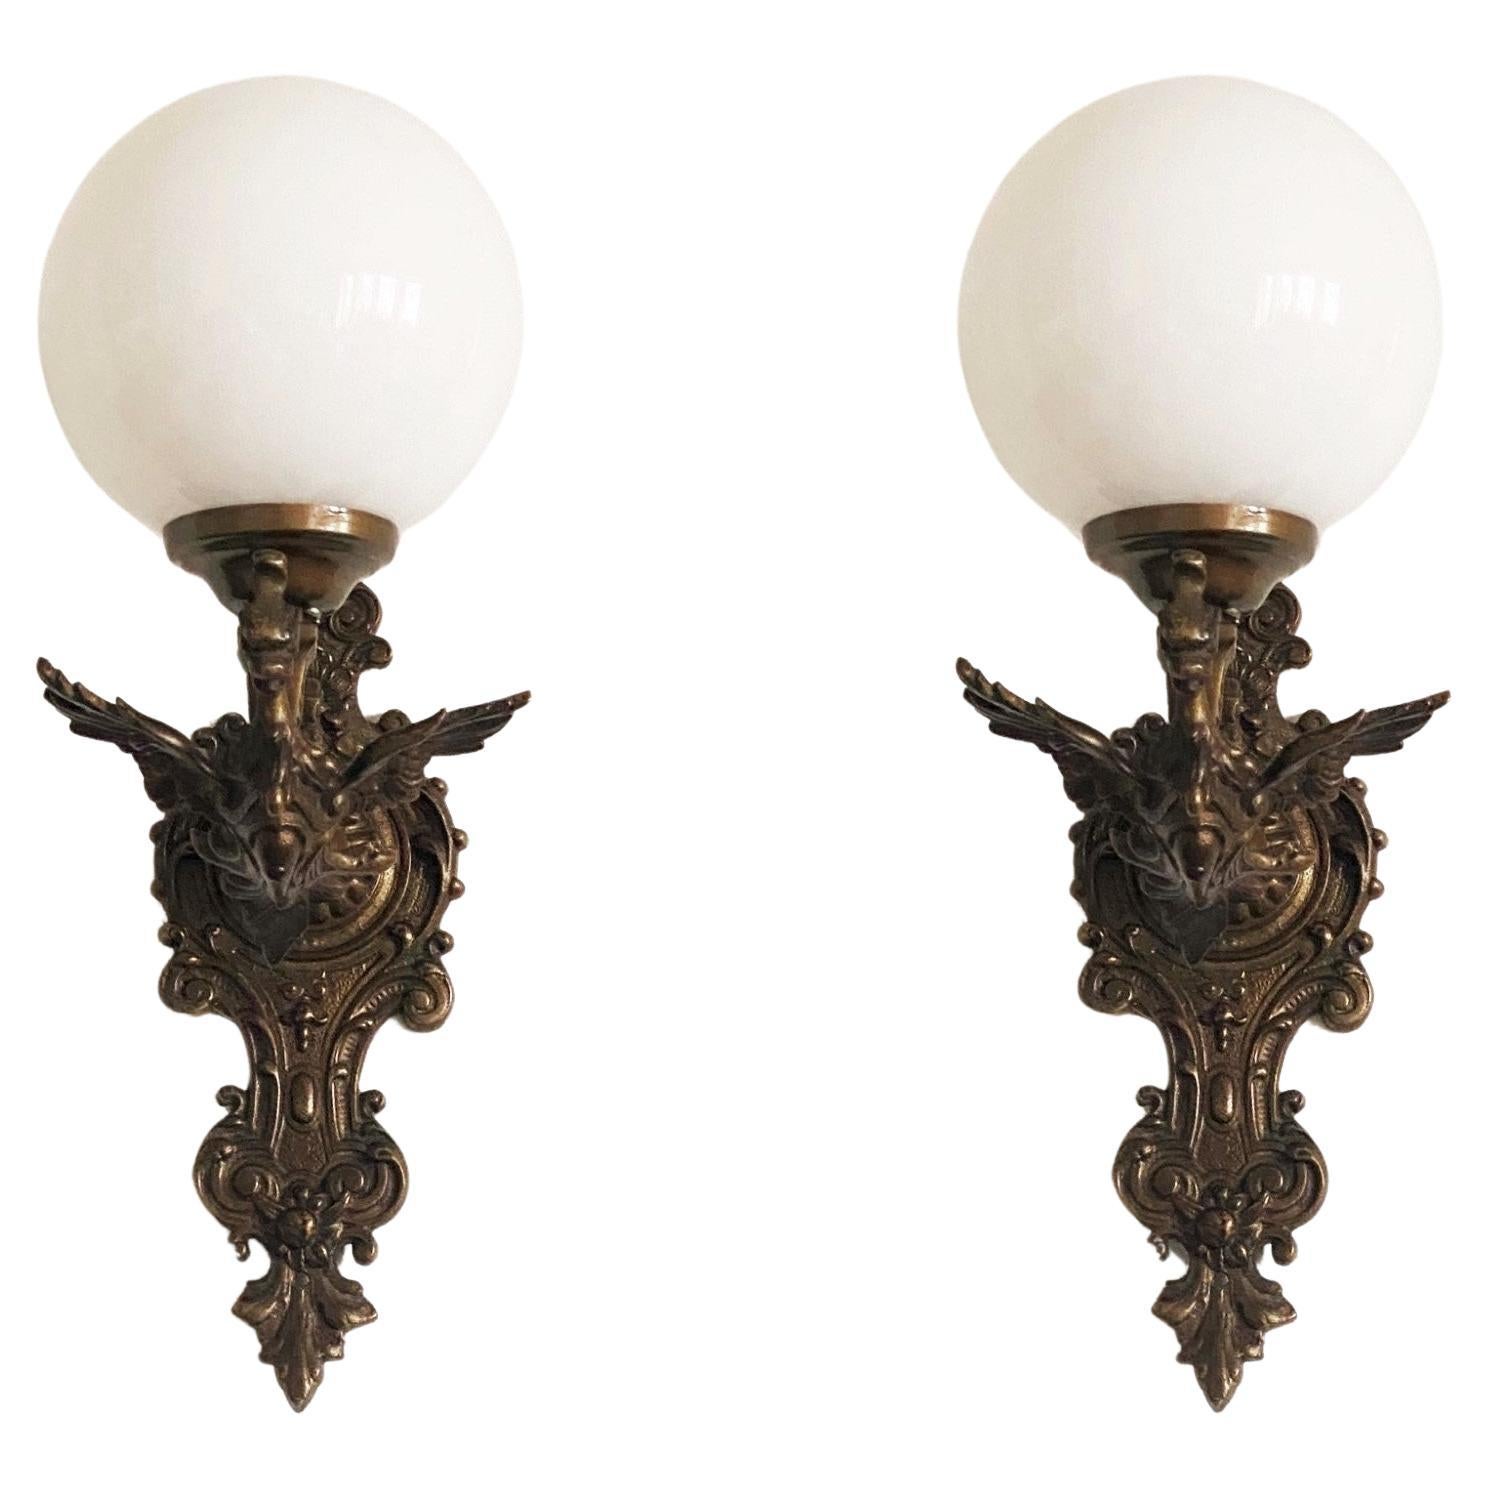 Set of three bronze dragon wall lights with opaline glass ball globes, for indoor and outdoor use, France, 1930s
The wall sconces are in very good condition, beautiful patina, rewired.
Each sconce takes 0ne Edison E14 screw bulb. LED bulbs can also